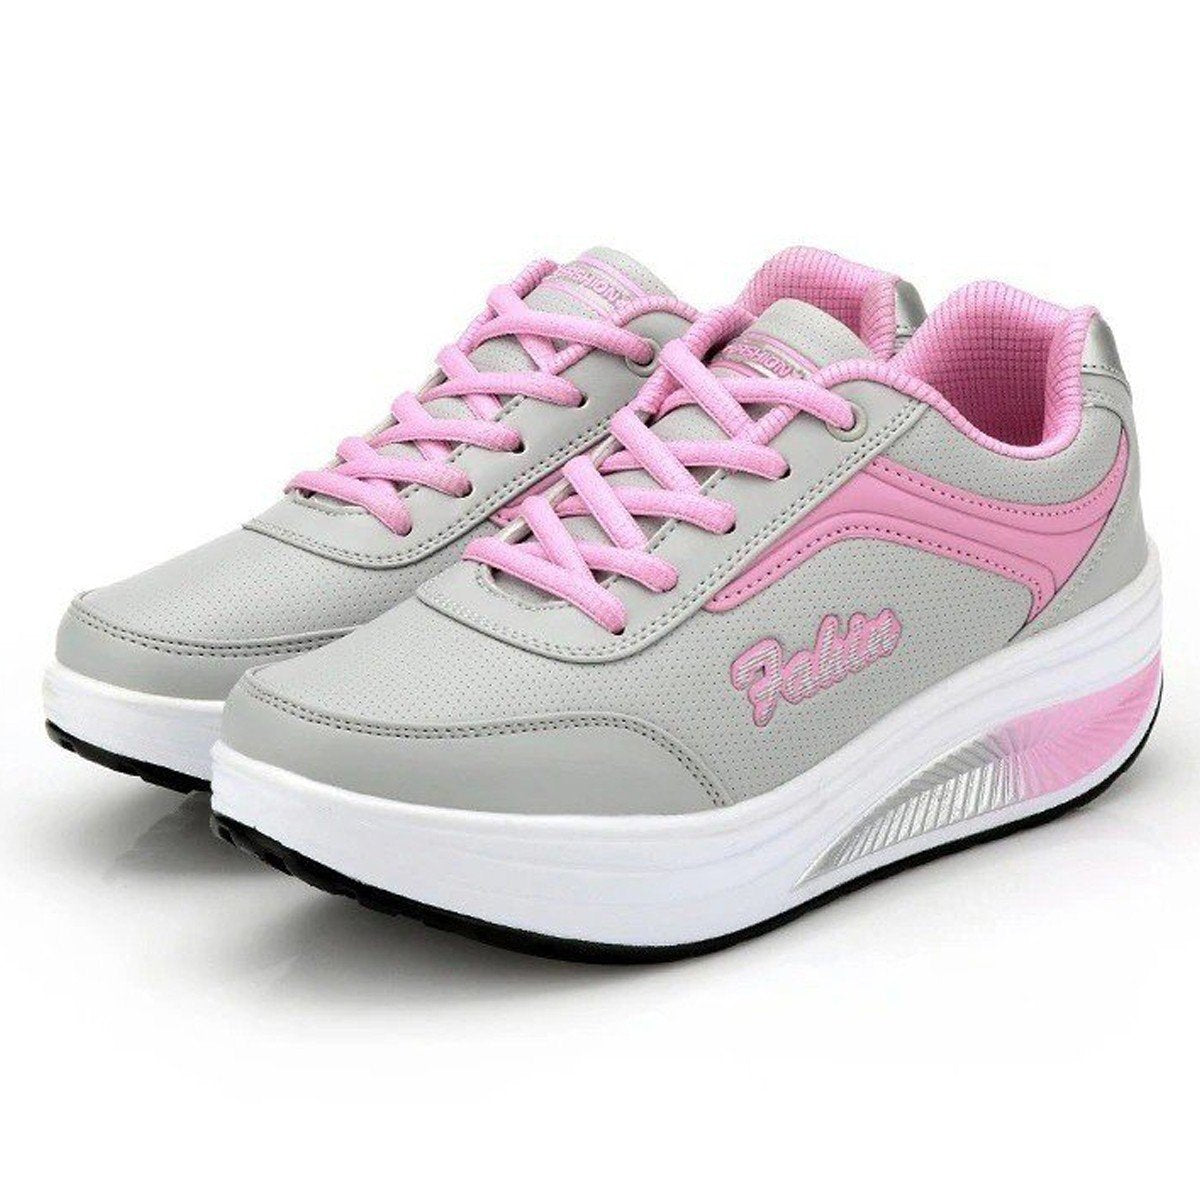 OCW Women Orthopedic Shoes Arch Support Comfortable Sport Air Cushion Sneakers